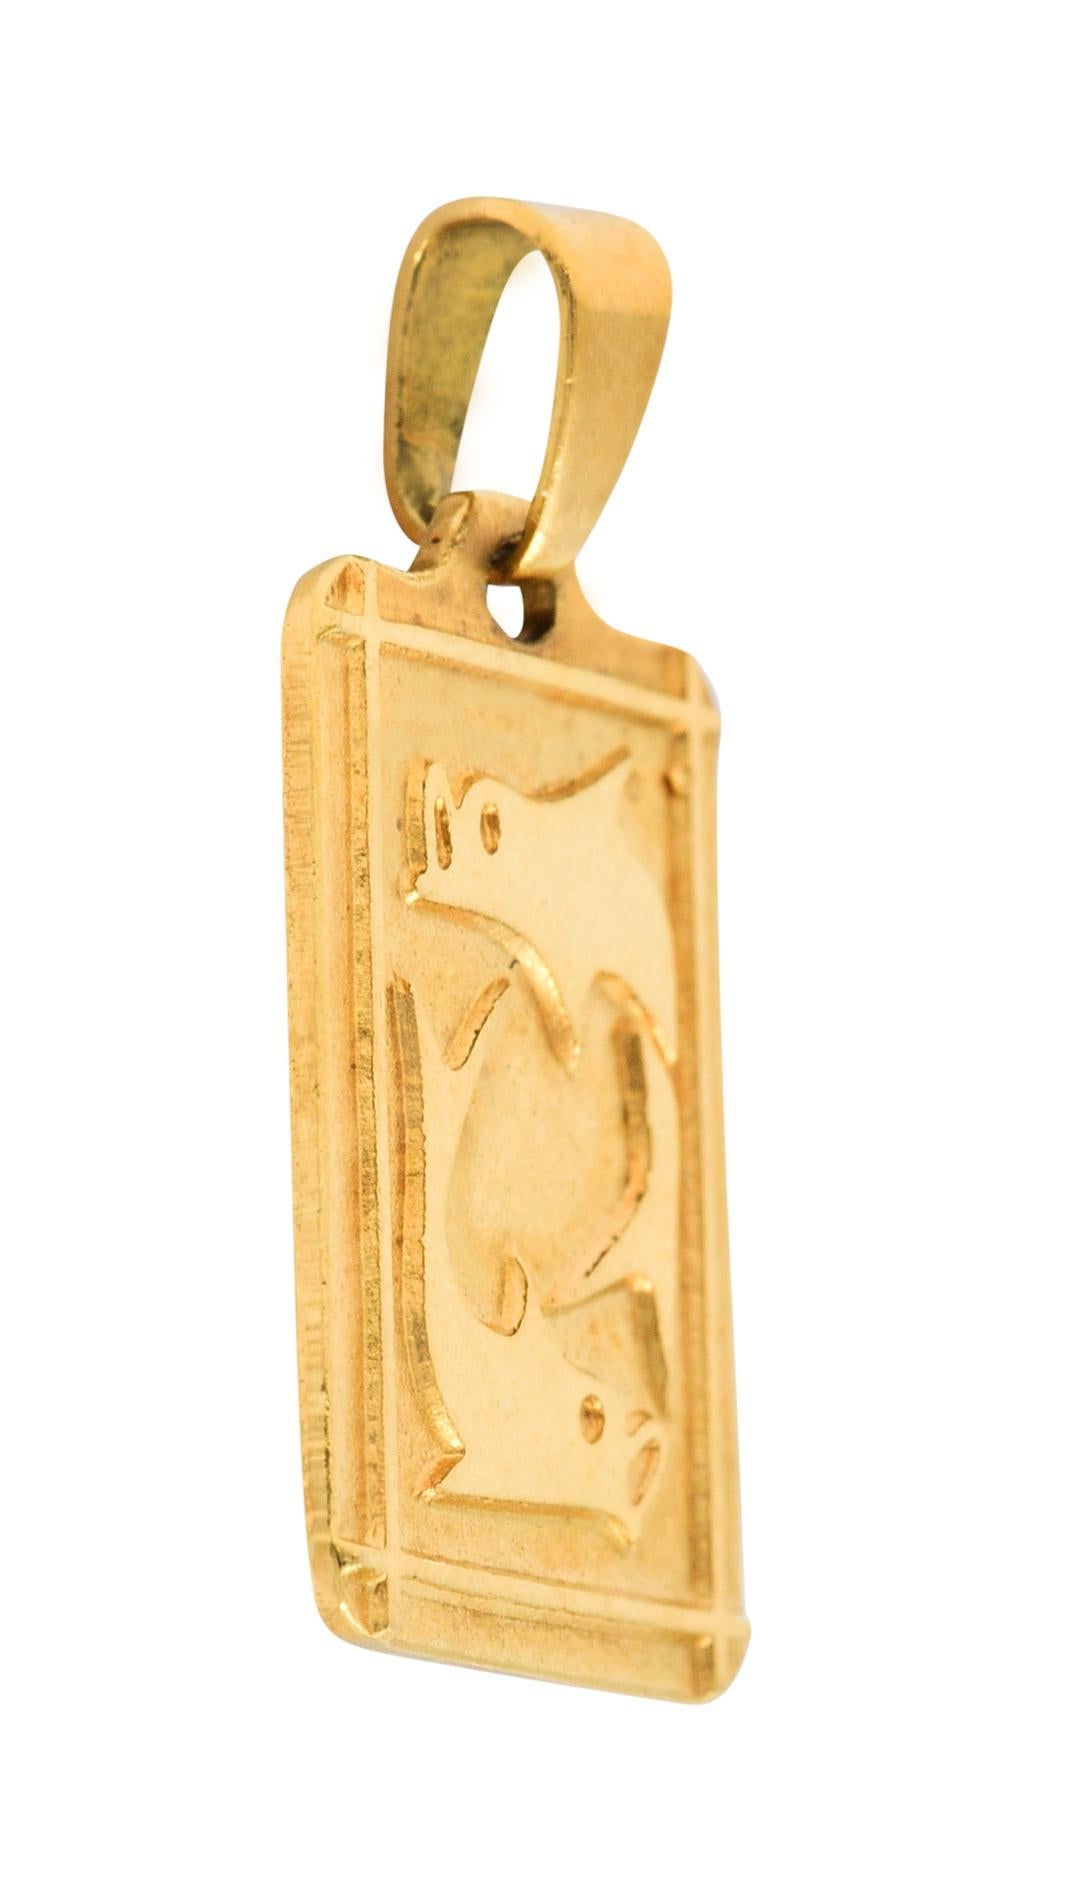 Rectangular charm has a stylized depiction of two mirrored fish

Slightly raised and surrounded by an intersecting linear border

With Italian assay marks for 18 karat gold

Signed UnoAErre

Circa: 1970s

Measures: 7/16 x 7/8 inch

Total weight: 2.1